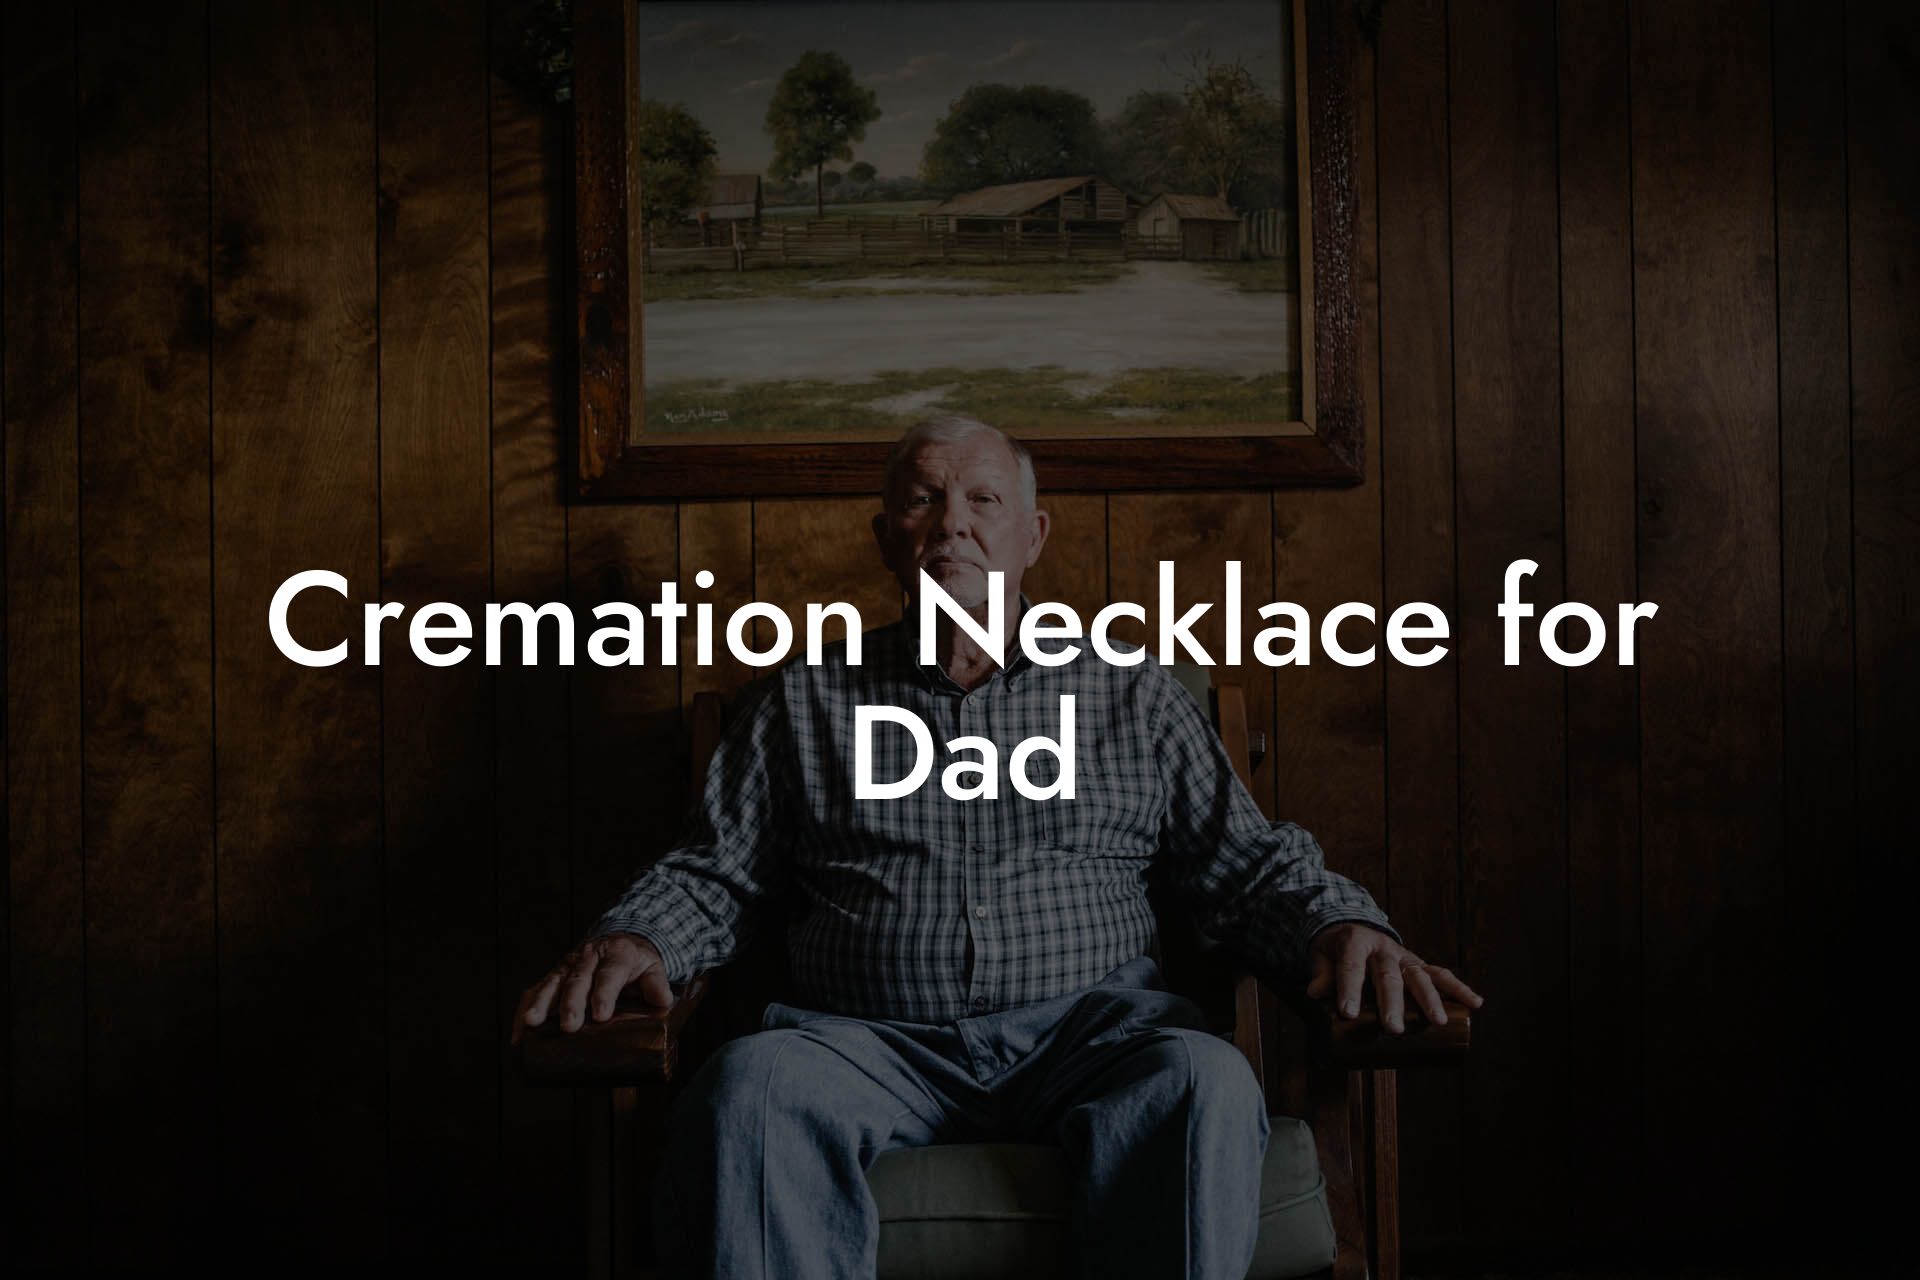 Cremation Necklace for Dad